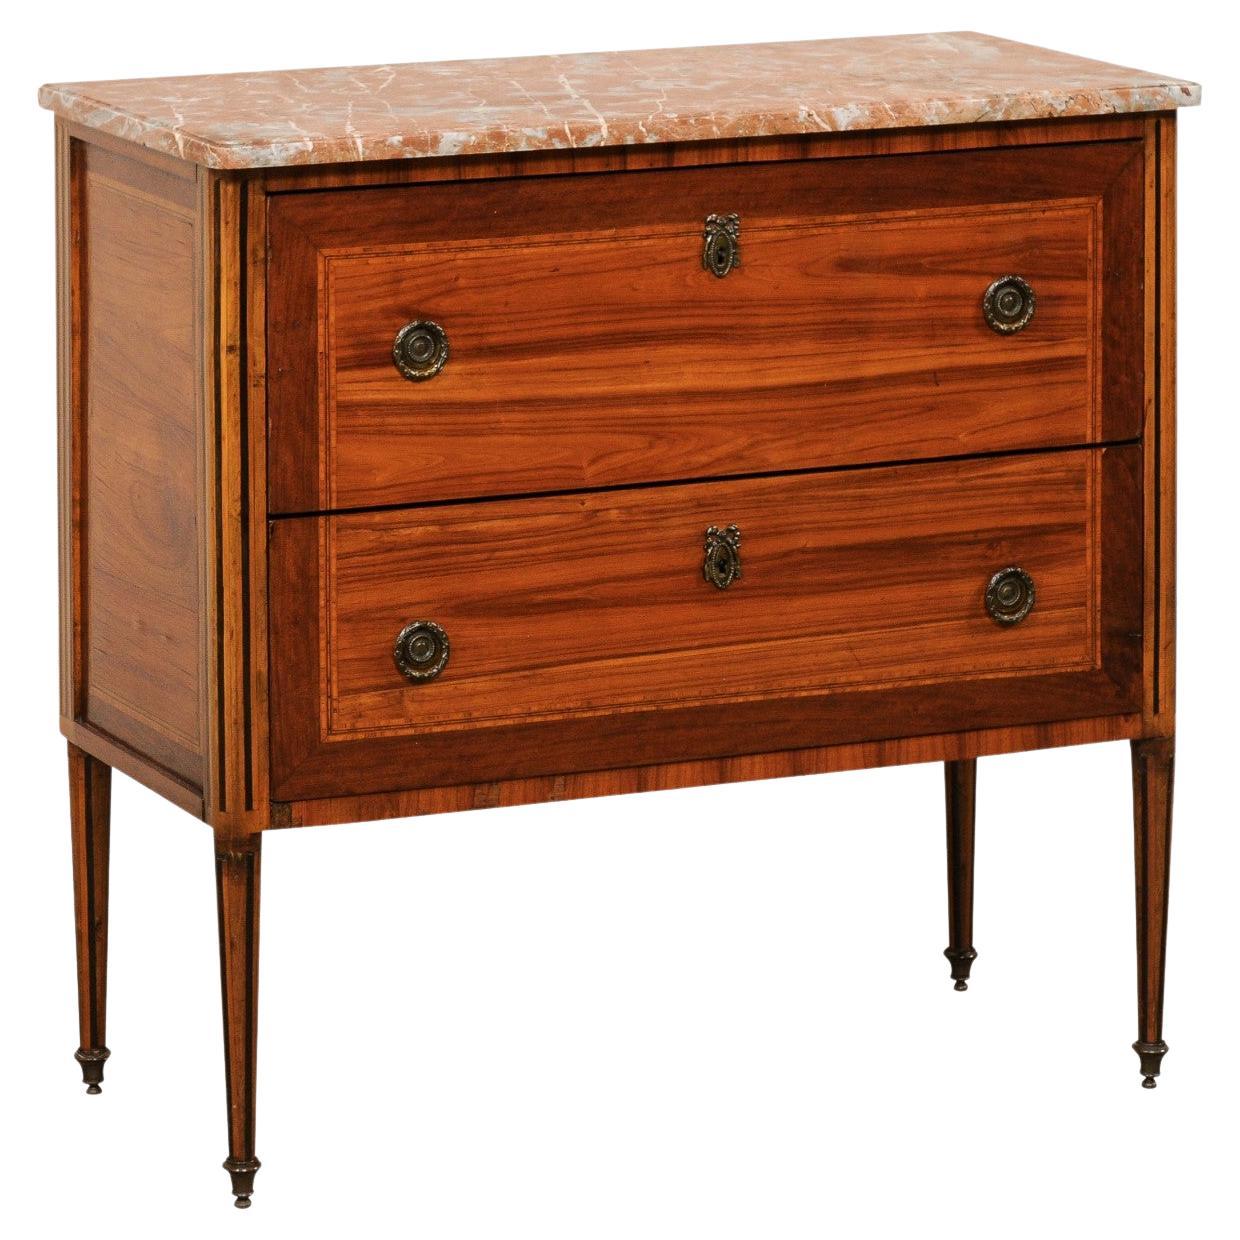 French 19th C Raised Commode w/ Lovely Inlays, Marble Top & Neoclassic Hardware For Sale